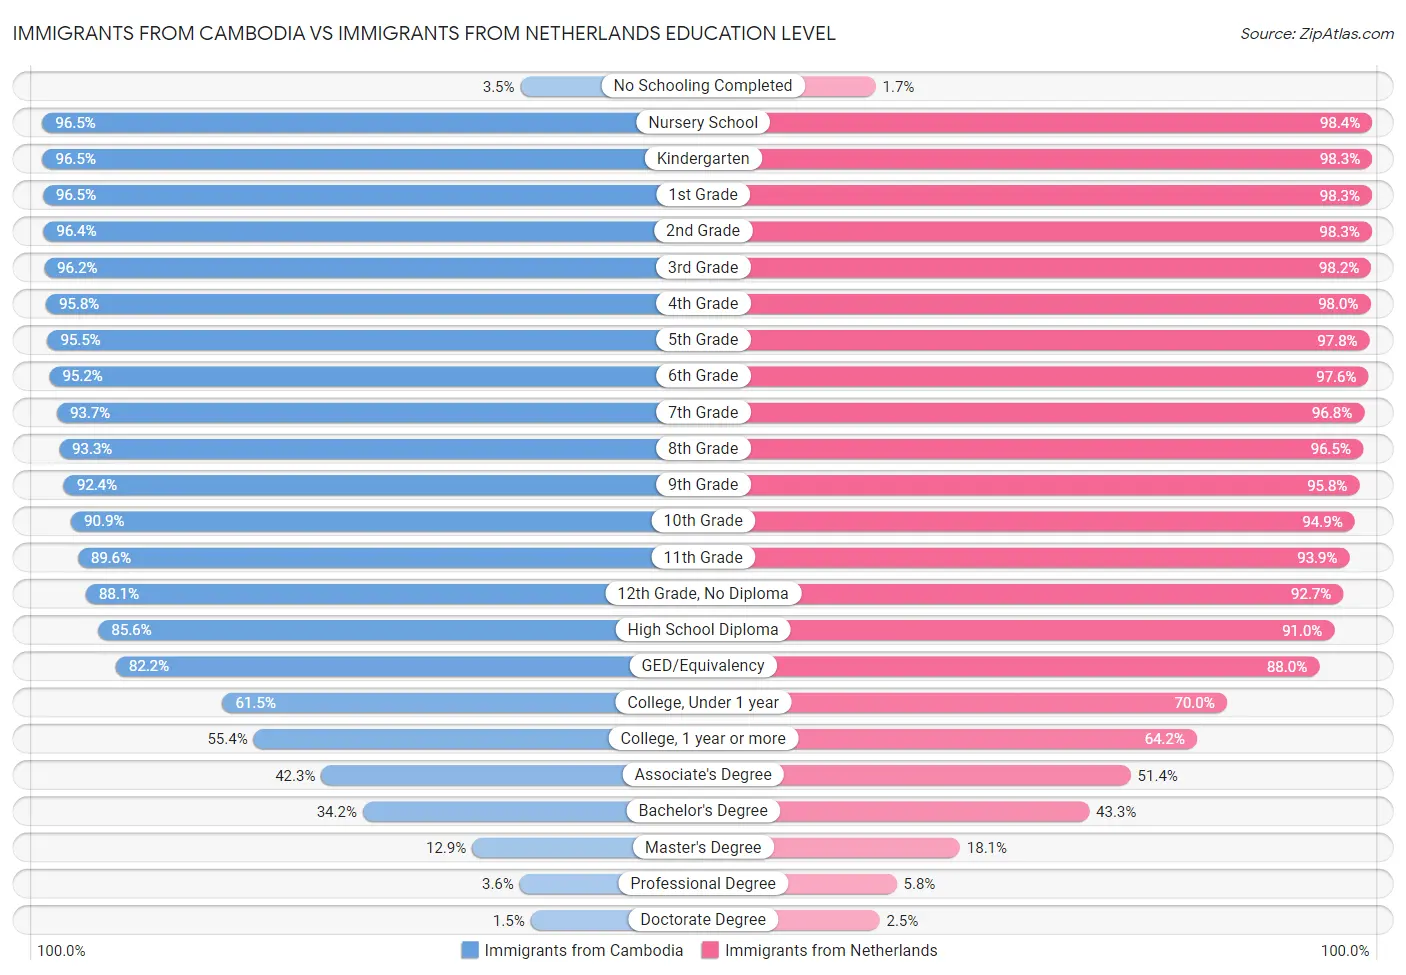 Immigrants from Cambodia vs Immigrants from Netherlands Education Level